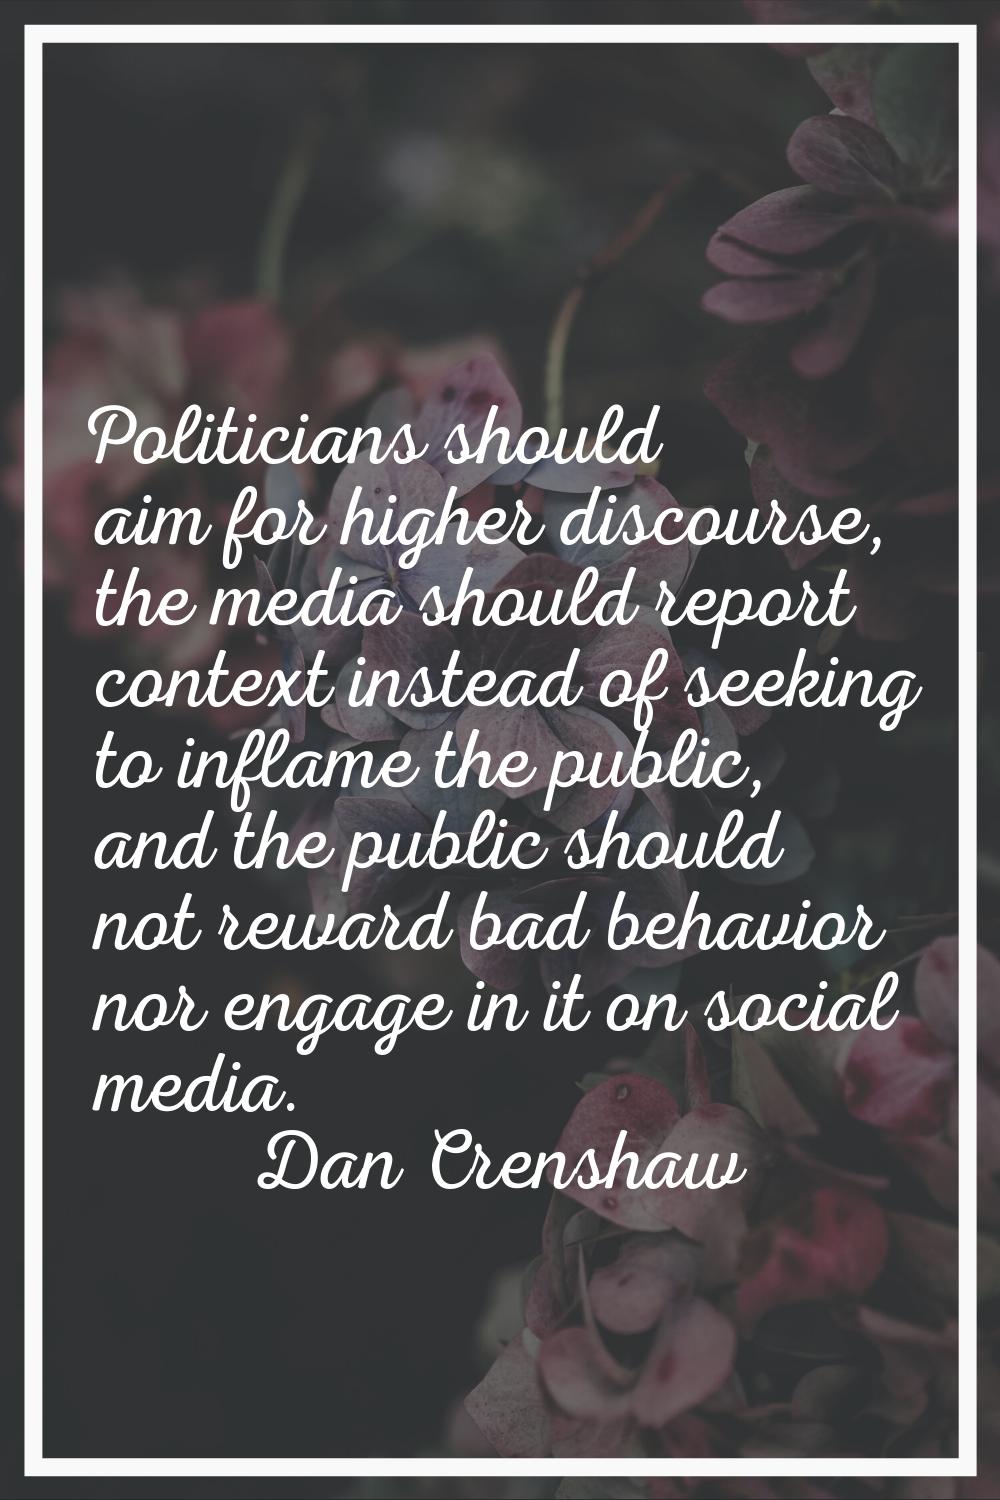 Politicians should aim for higher discourse, the media should report context instead of seeking to 